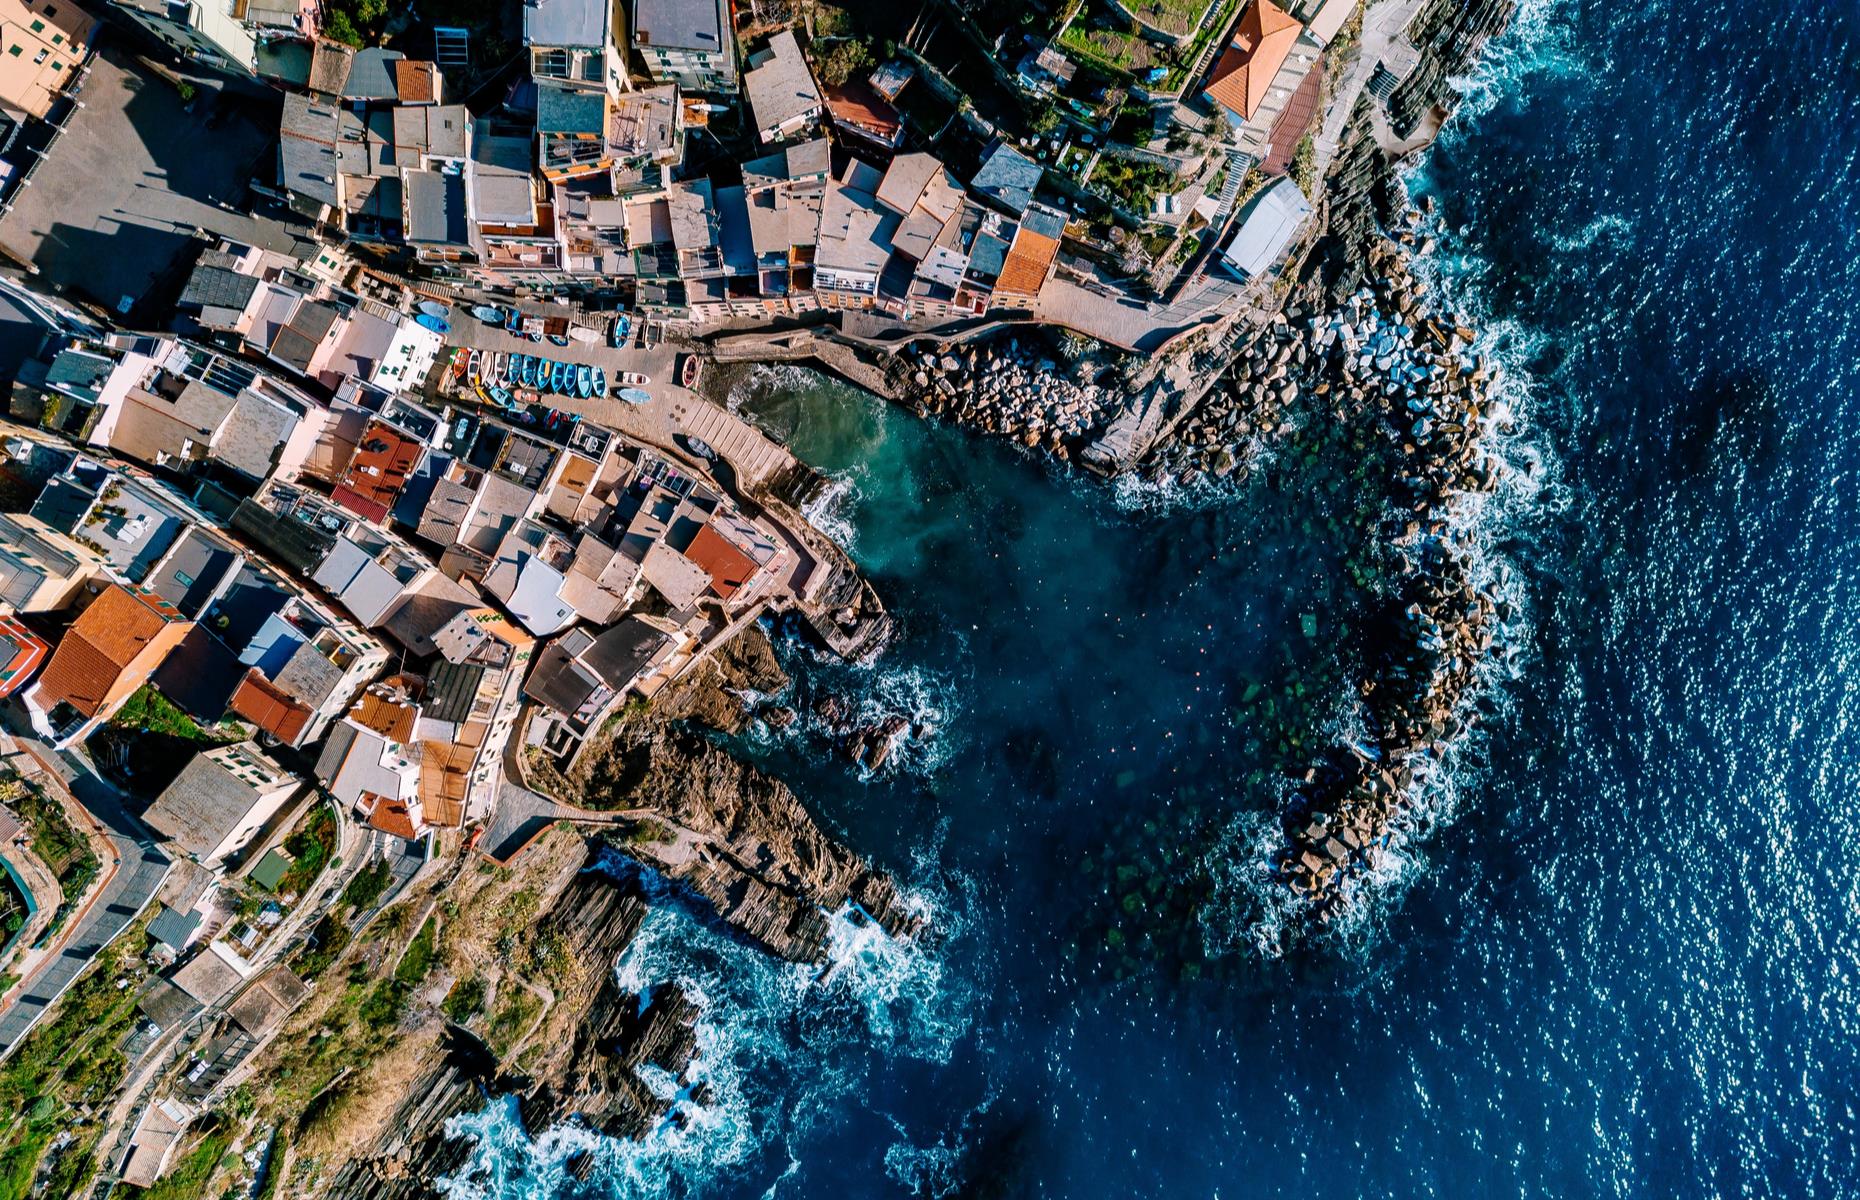 <p>Known for its vertiginous cliffs, rocky coves and dainty, colorful houses, northern Italy’s Cinque Terre is made up of five villages: Riomaggiore, Manarola, Corniglia, Vernazza and Monterosso. Pictured here is Riomaggiore, the region’s easternmost village, its pastel-toned rooftops and colorful wooden fishing boats set against deep blue waters.</p>  <p><strong><a href="https://www.loveexploring.com/gallerylist/104543/the-worlds-most-beautiful-coastal-towns-and-villages">Discover the world's most beautiful coastal towns and villages here</a></strong></p>